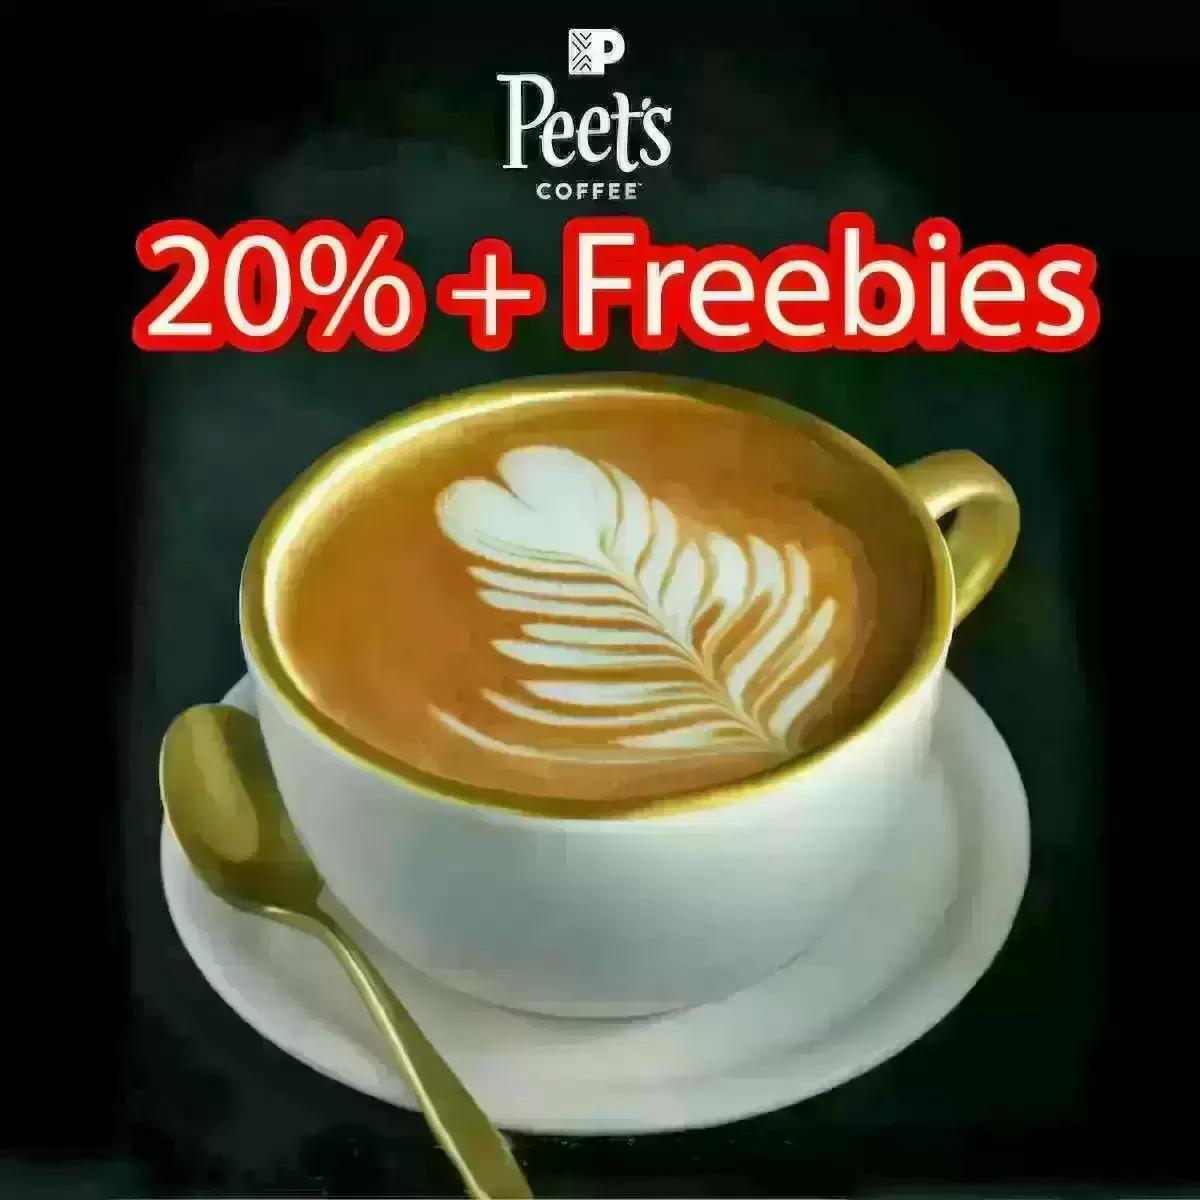 How to Get a Discount at Peets Coffee